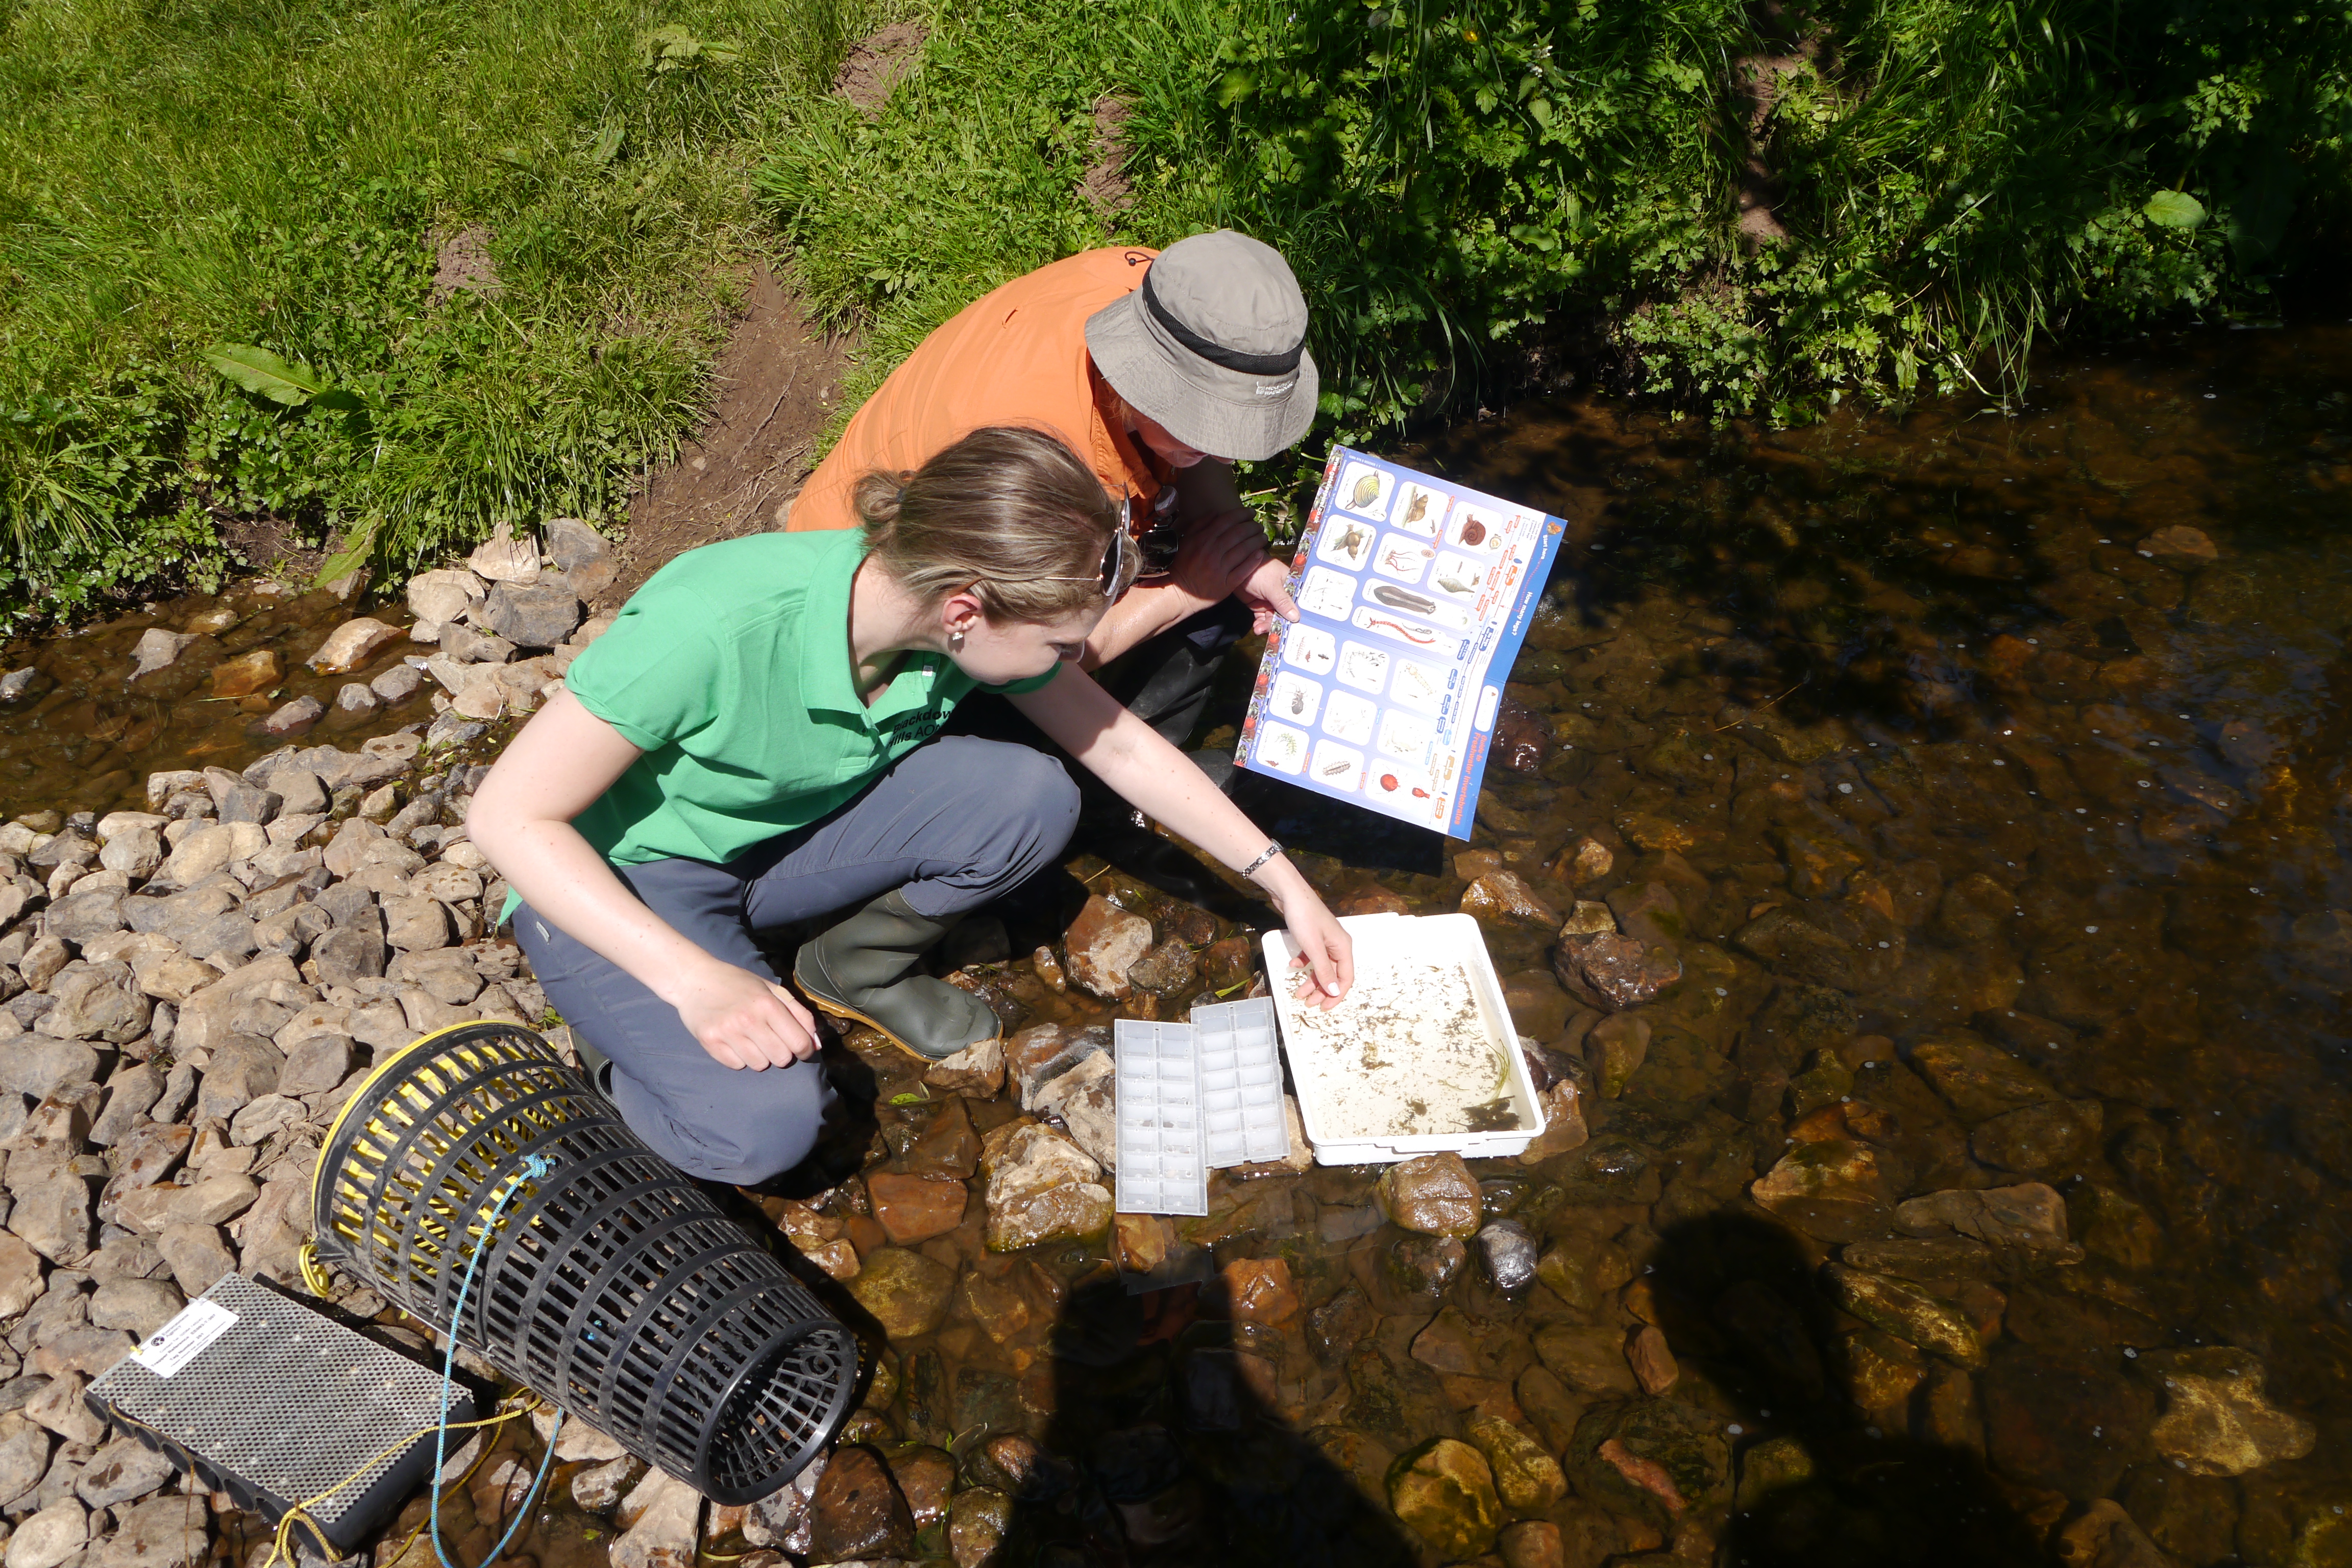 Two people at the river bank examining invertebrates in a tray